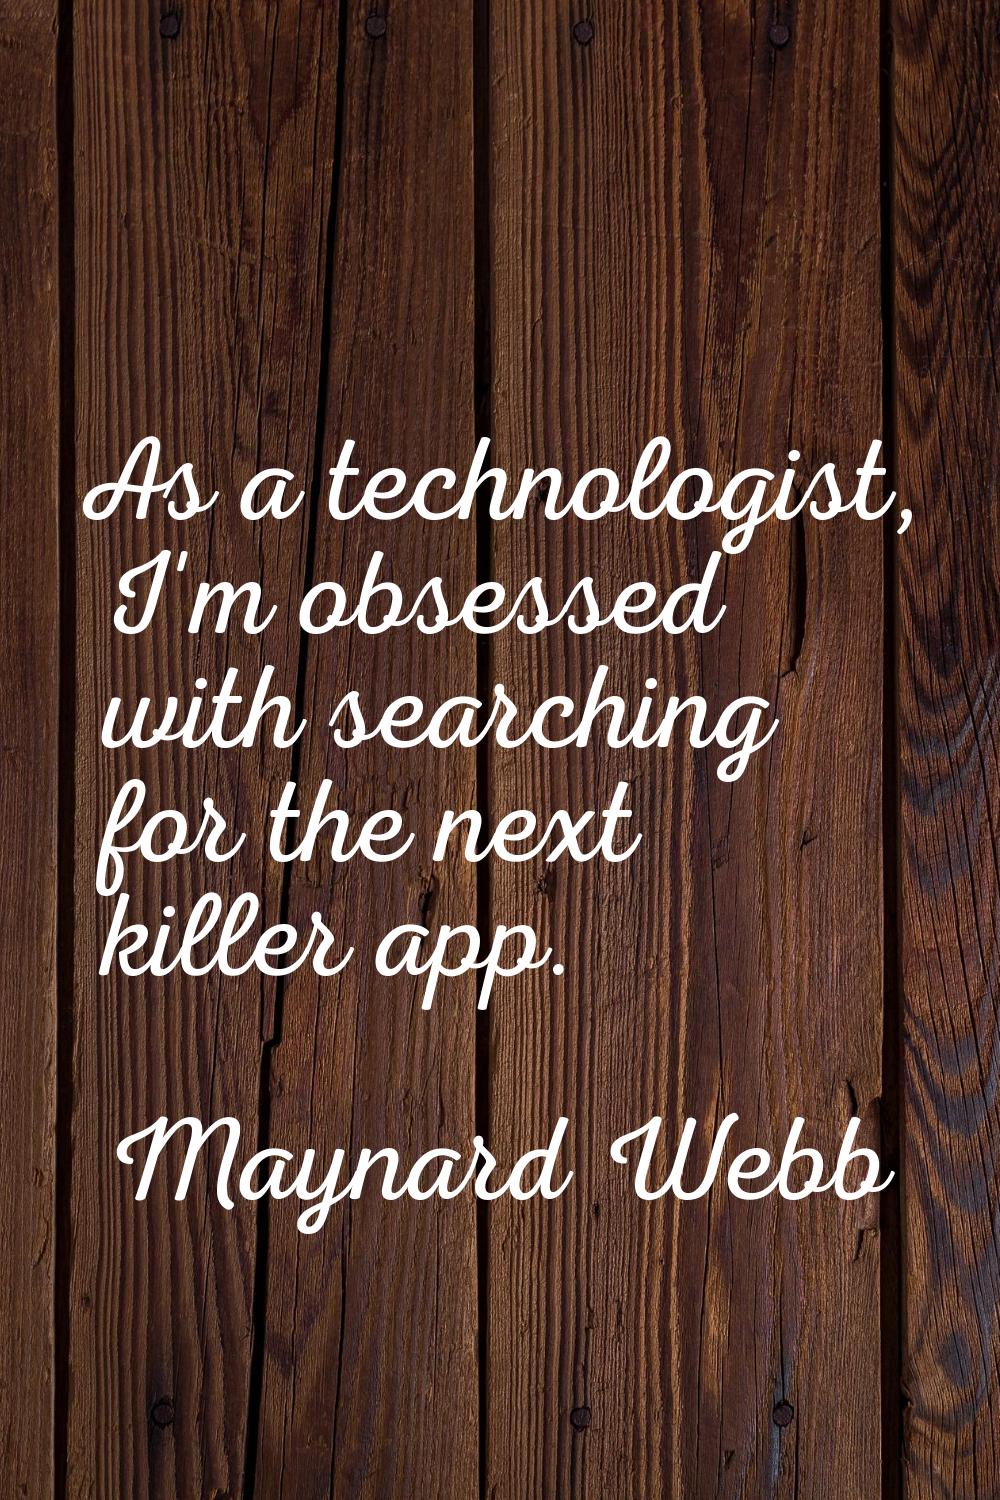 As a technologist, I'm obsessed with searching for the next killer app.